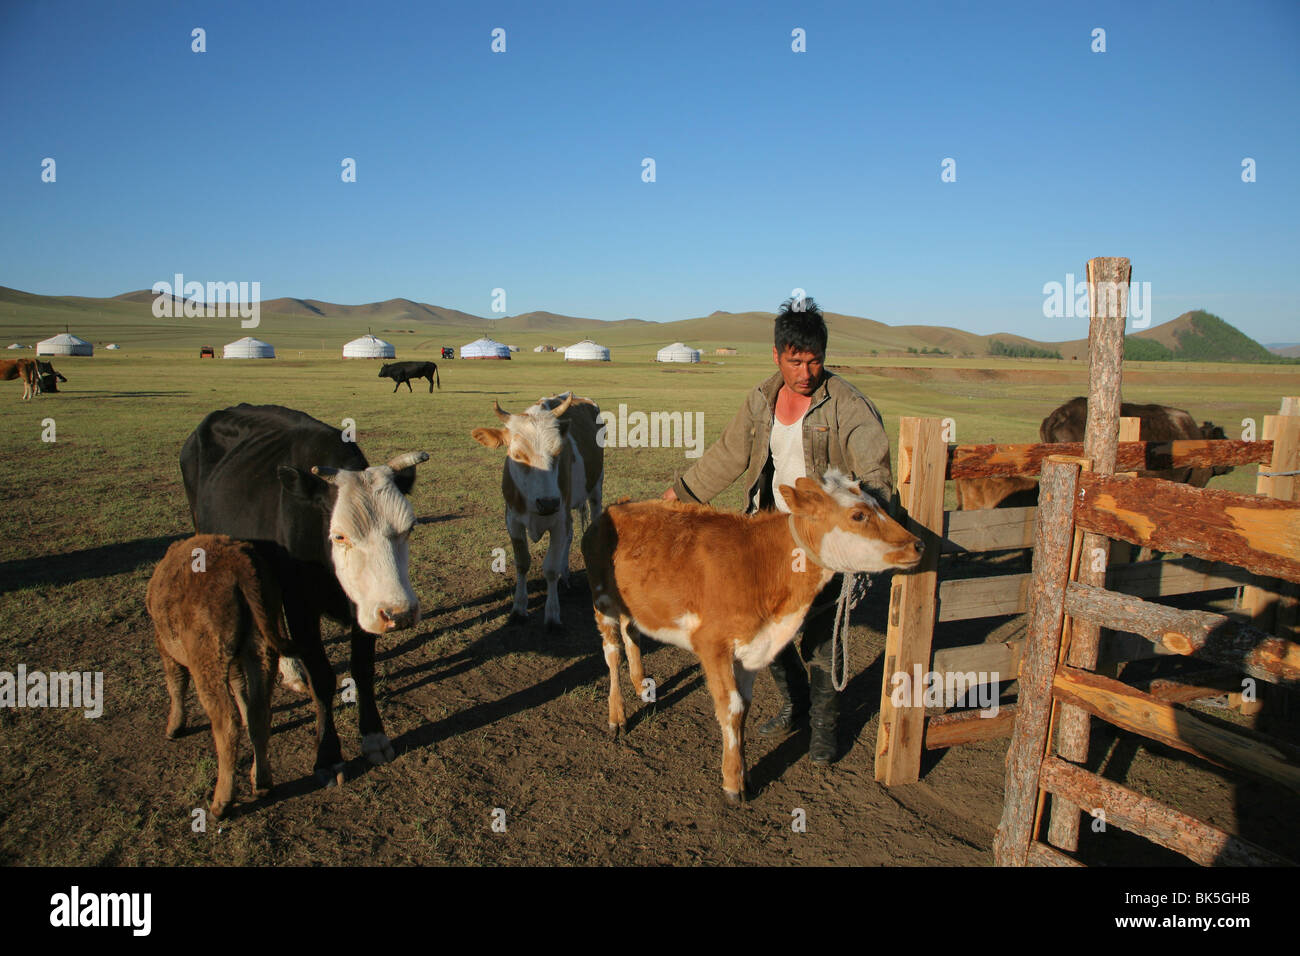 Man milking cows with yurts in the background, Mongolia Stock Photo